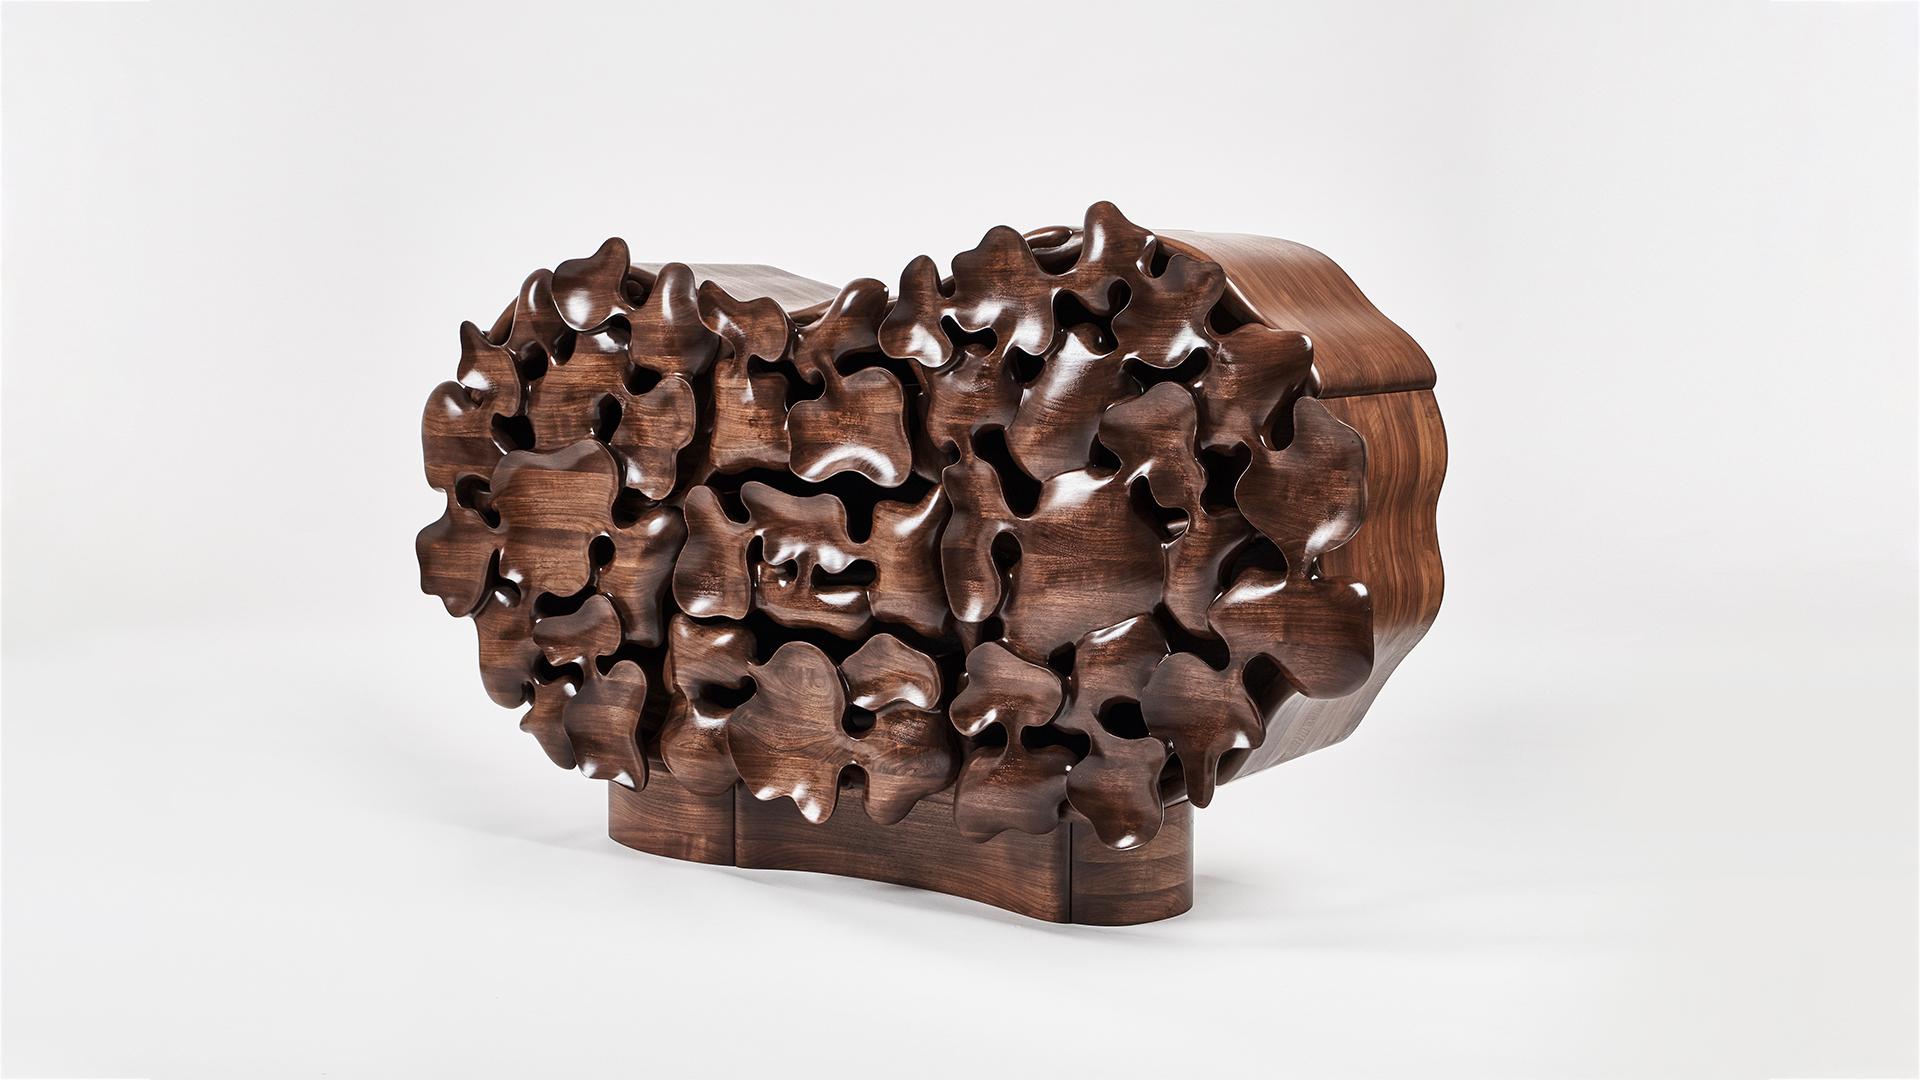 Seoul-based designer Kim Yunhwan’s remarkable hand carved furniture began as series of small objects, trays, vessels, bowls, that had, what he calls, “unintended shapes.” Scrutinizing these objects, Kim found that by connecting them, reversing them